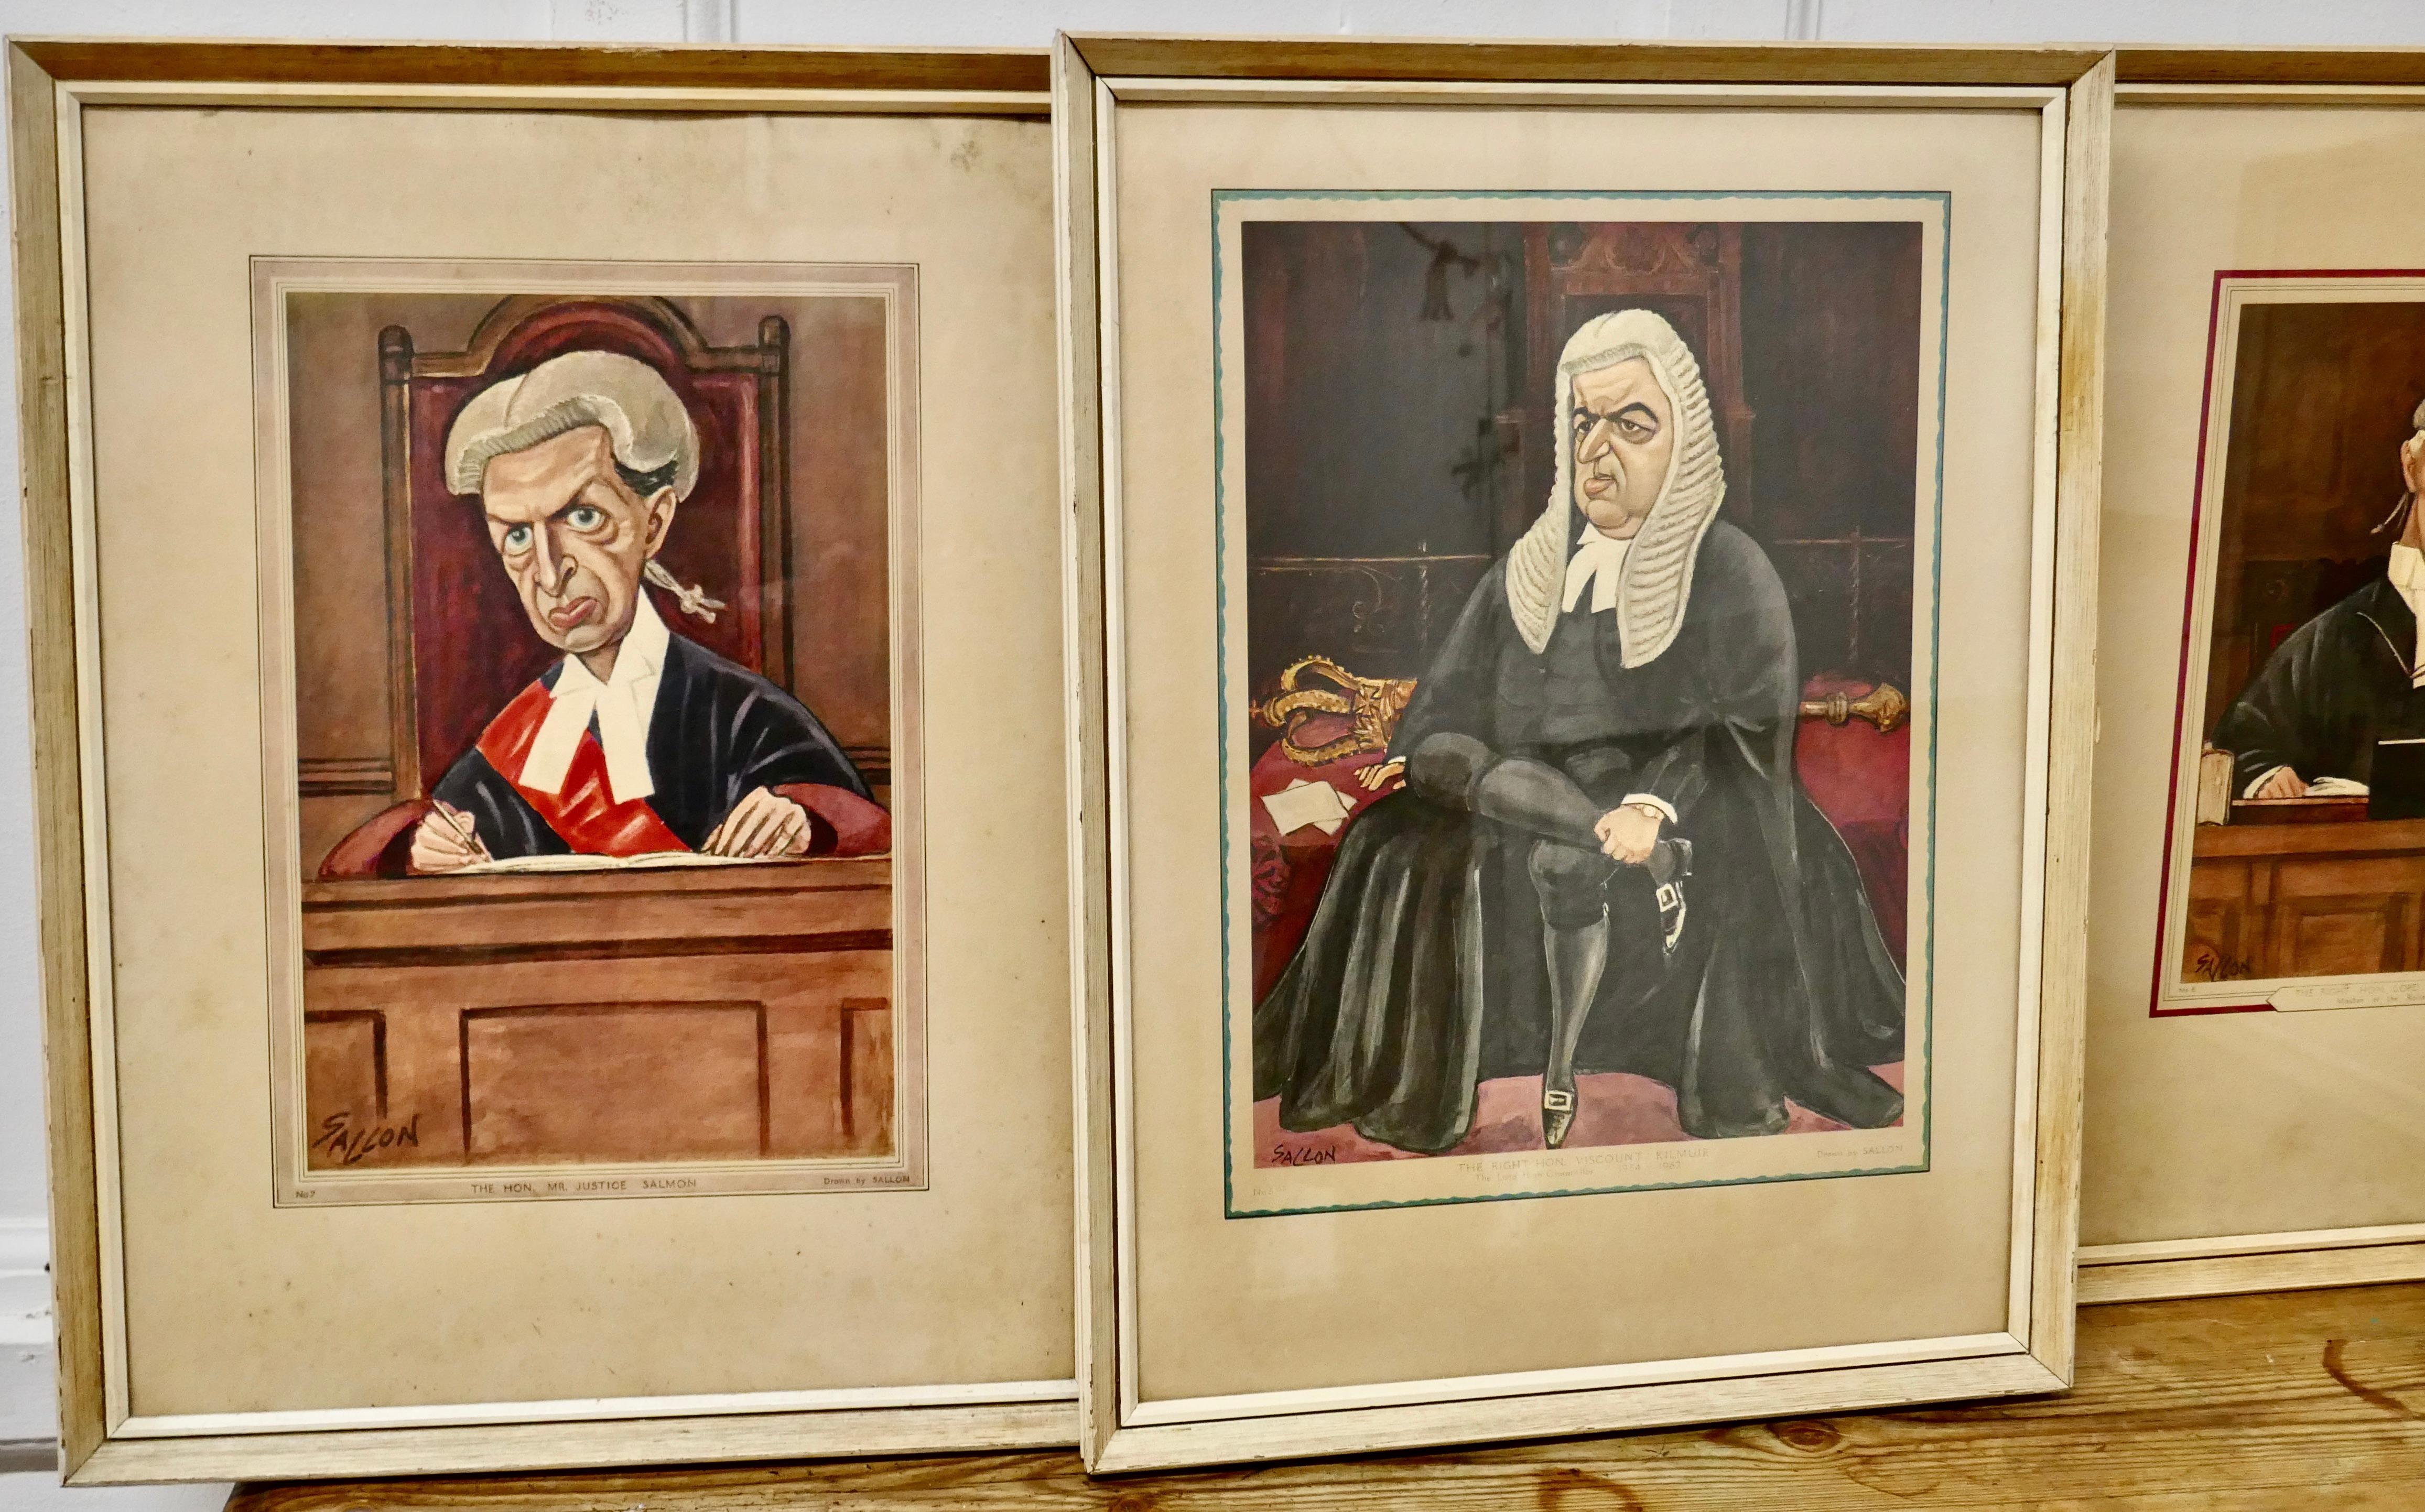 Expressionist 4 Original Caricature Prints of Honourable Justices of Great Britain by Sallo For Sale